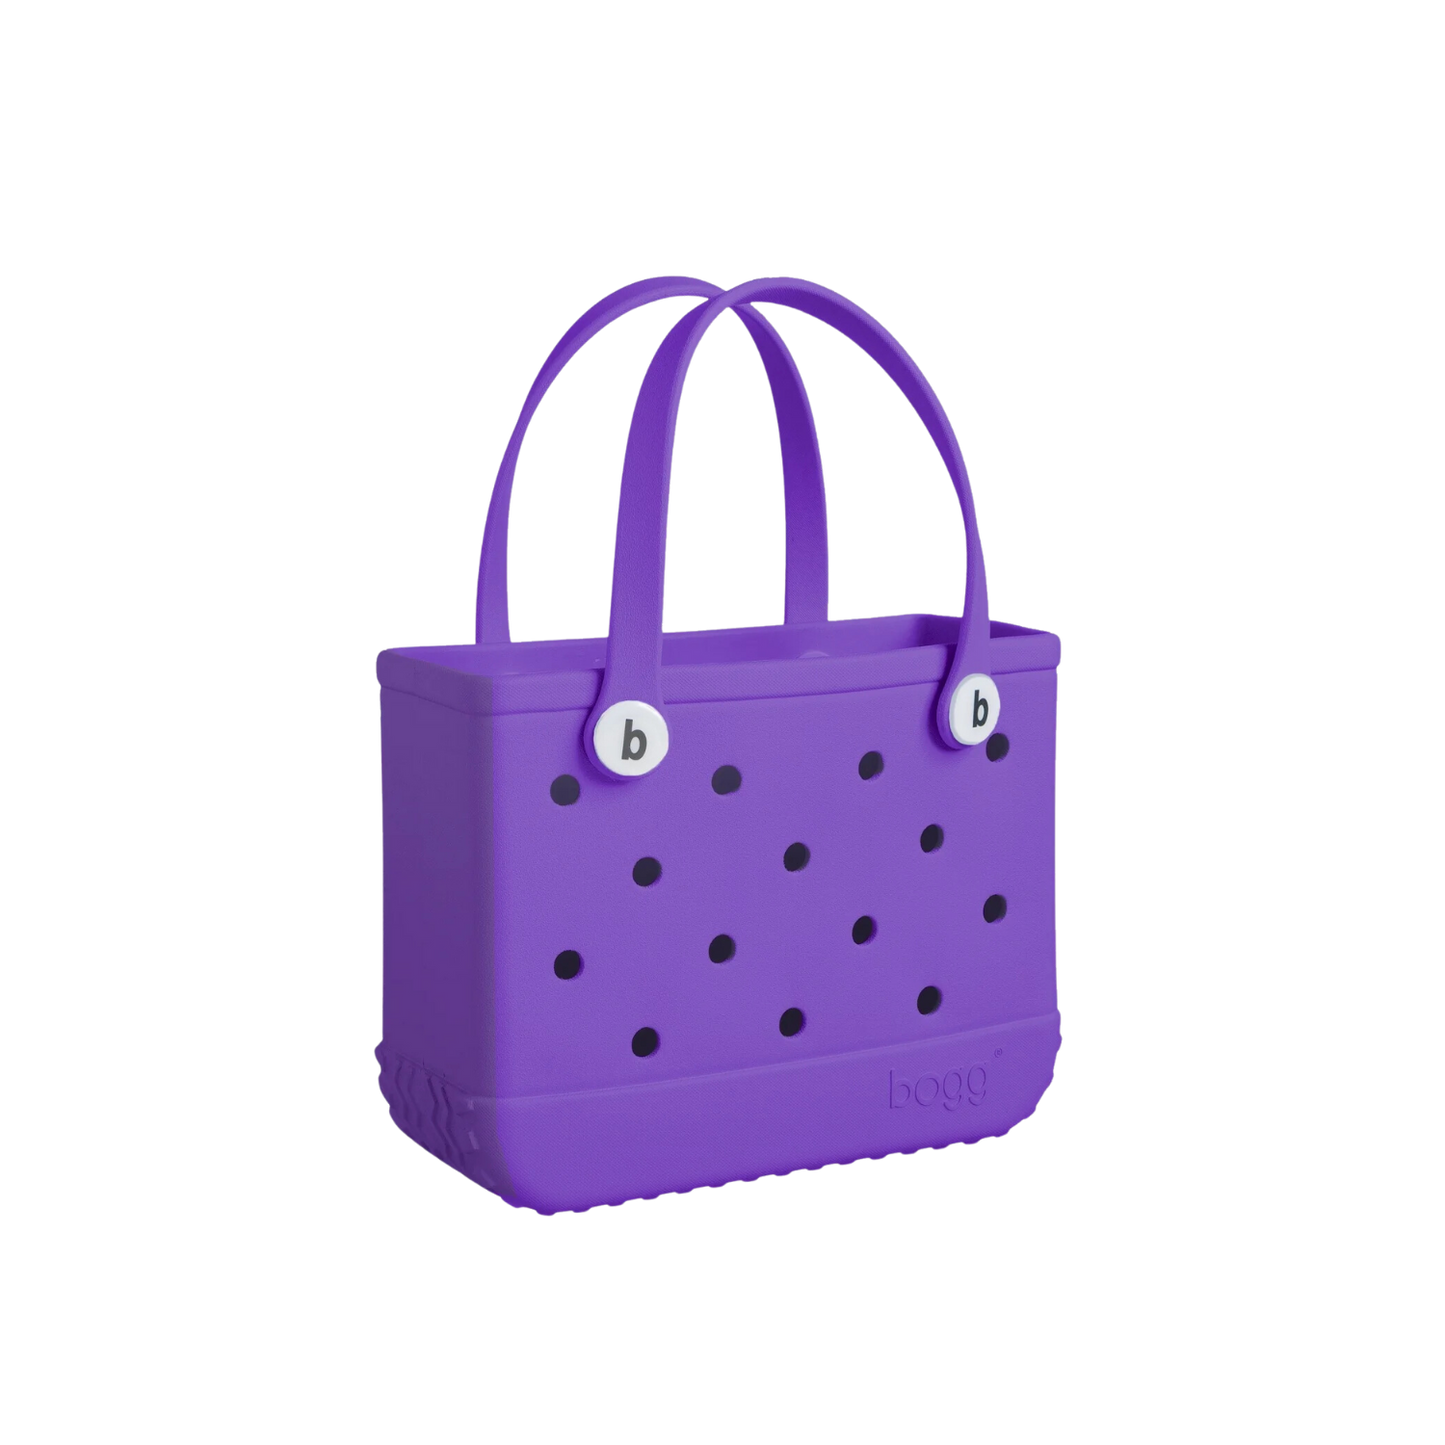 Bitty Bogg® Bag - Houston we have a PURPLE